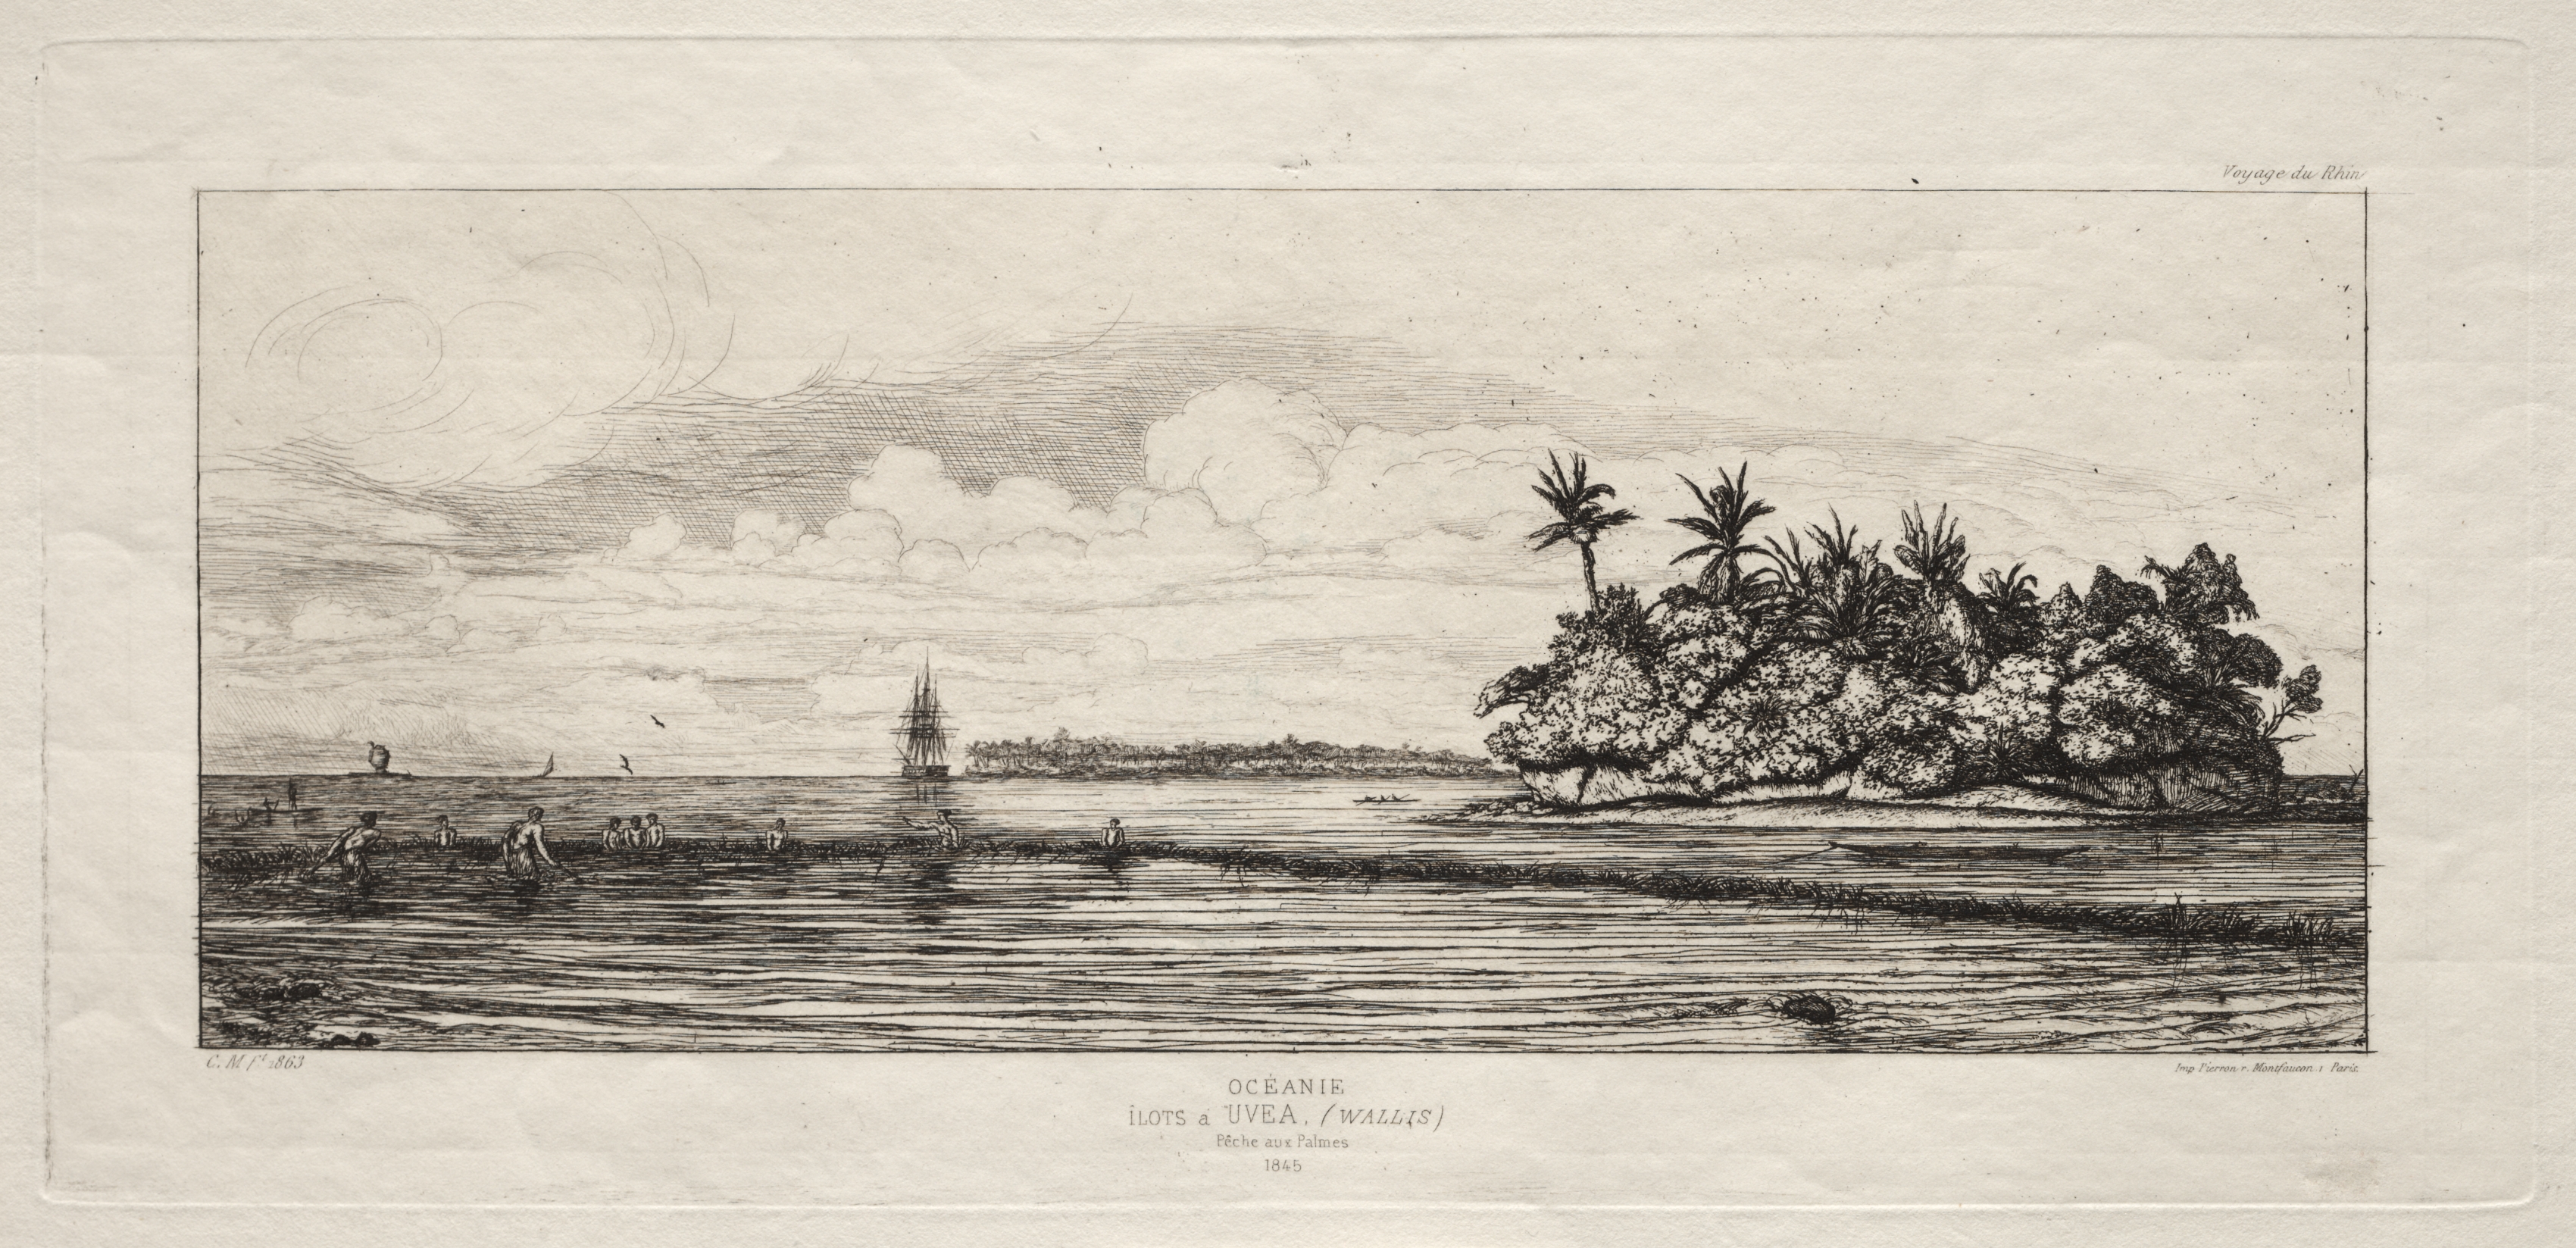 Oceania:  Fishing near Islands with Palms in the Uea or Wallis Group, 1845